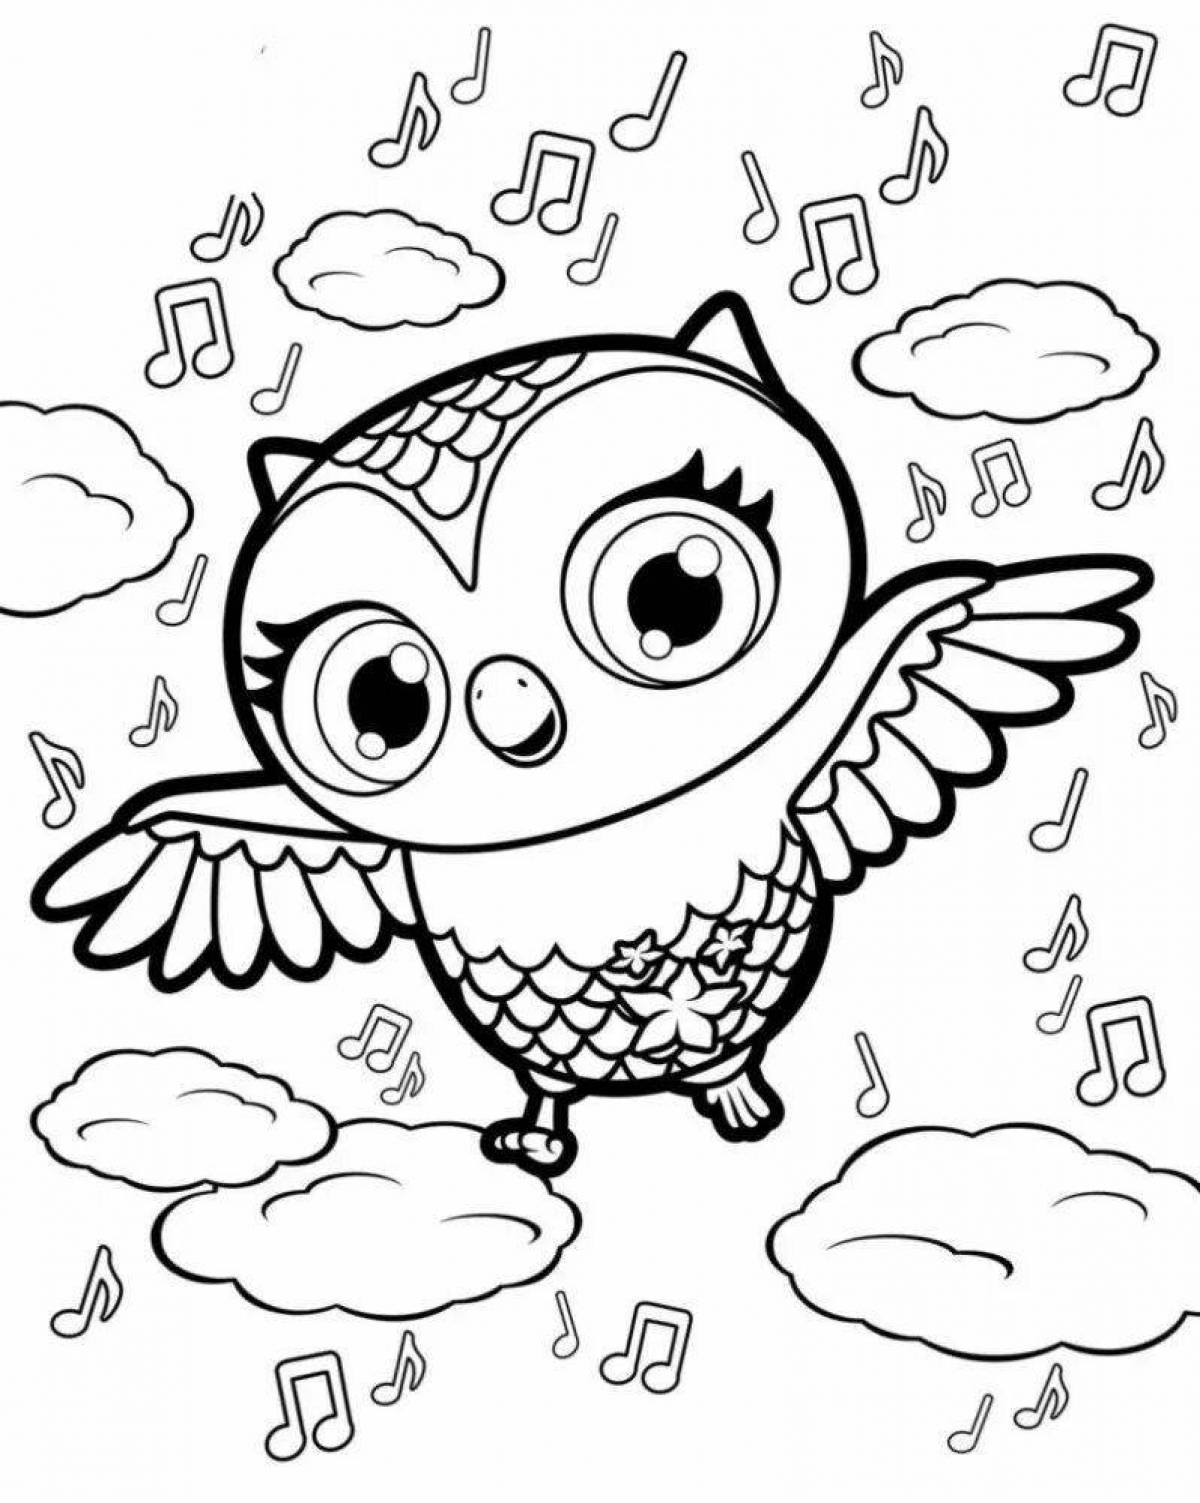 Great owlet coloring book for kids